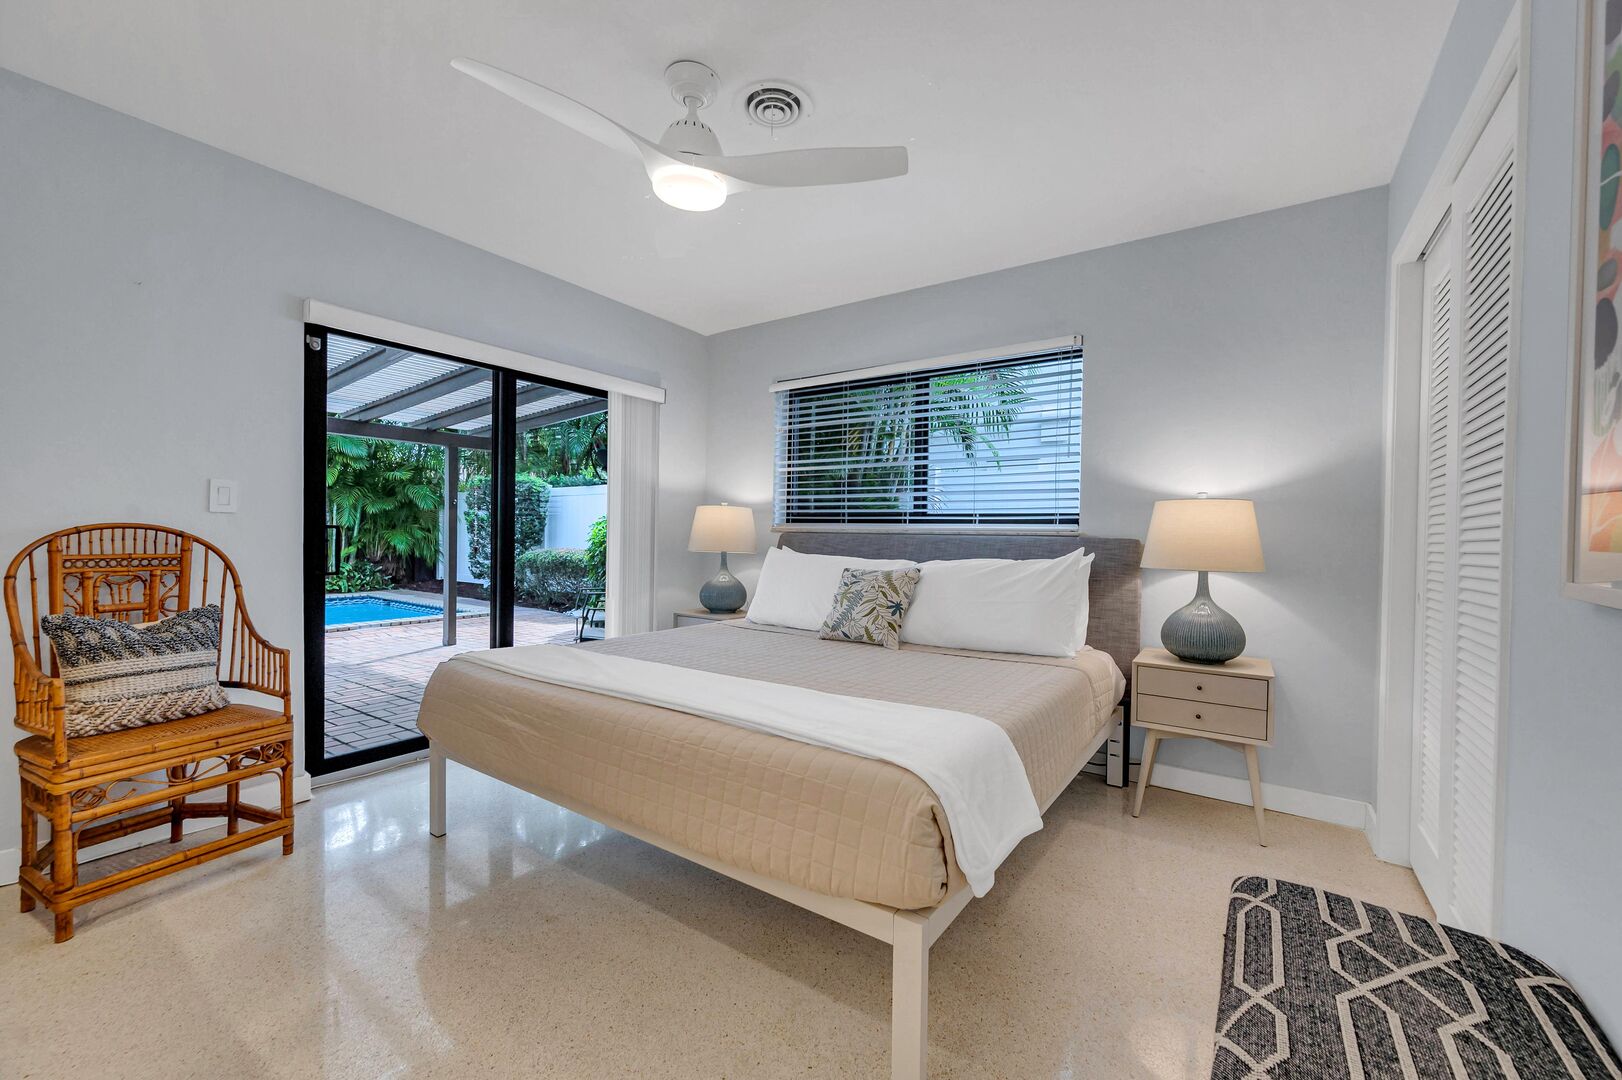 The third bedroom with king size bed, smart TV, and an amazing view with private access to the heated pool, patio and lush surroundings.